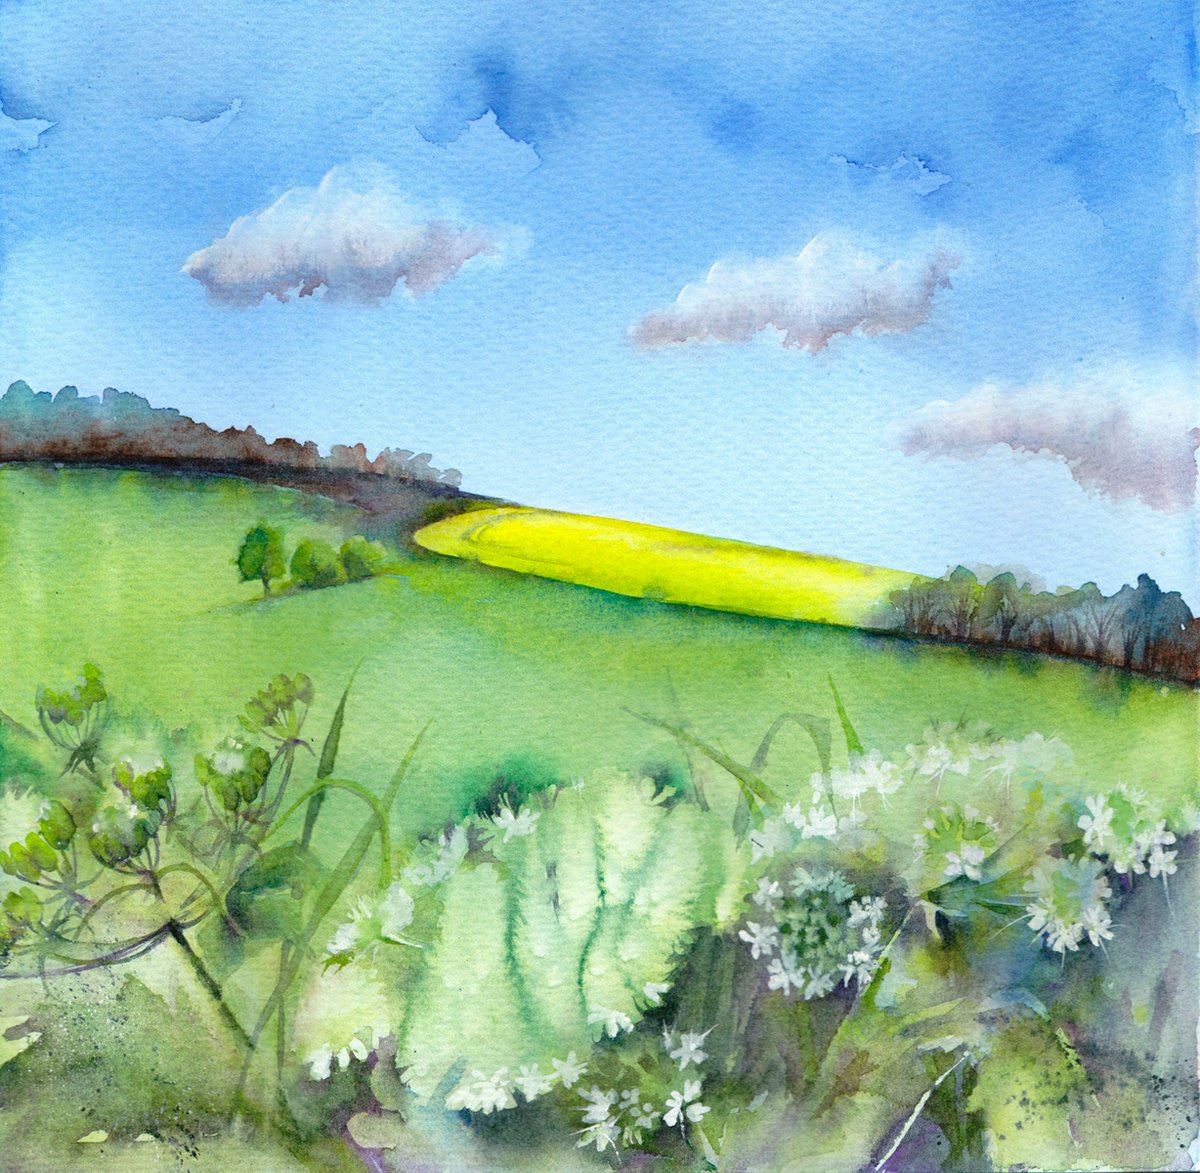 Clouds and Cow parsley, Original landscape painting by Anjana Cawdell